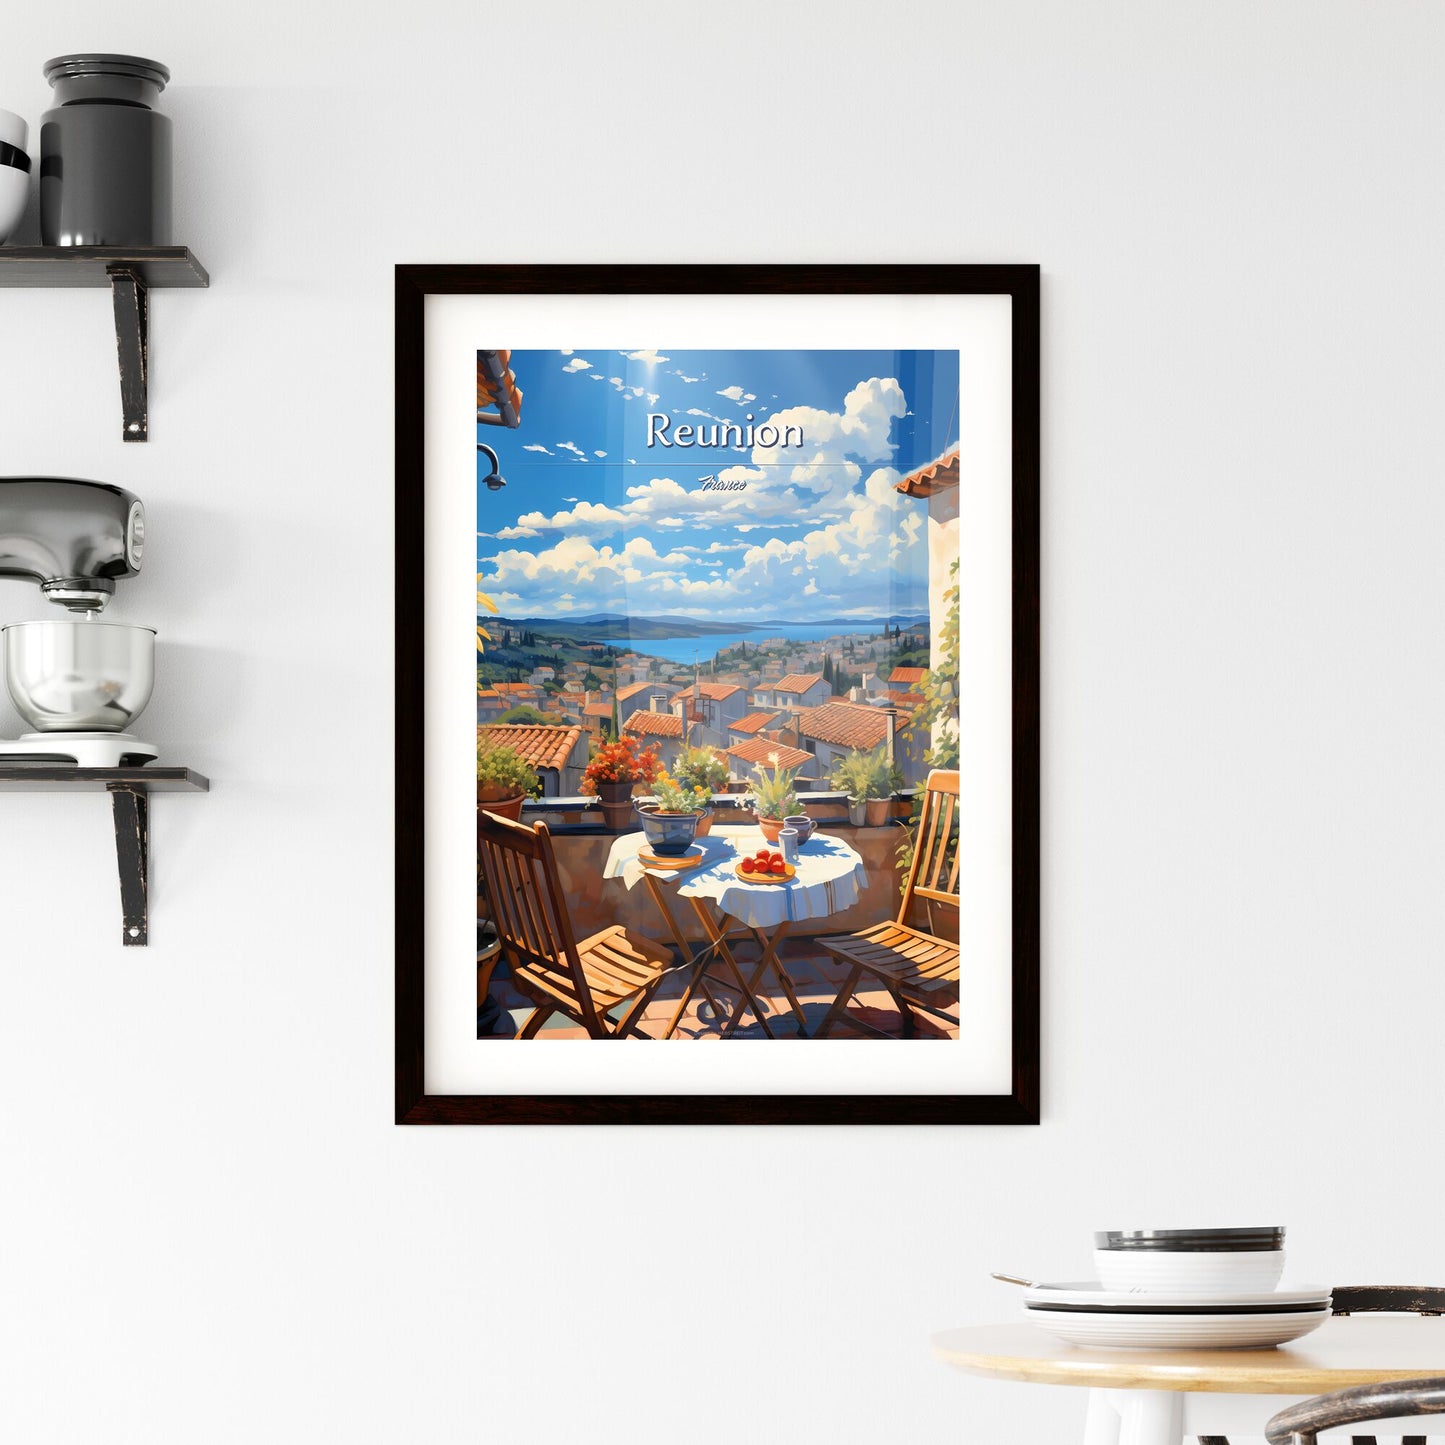 On the roofs of Reunion, France - Art print of a table and chairs on a balcony overlooking a city Default Title